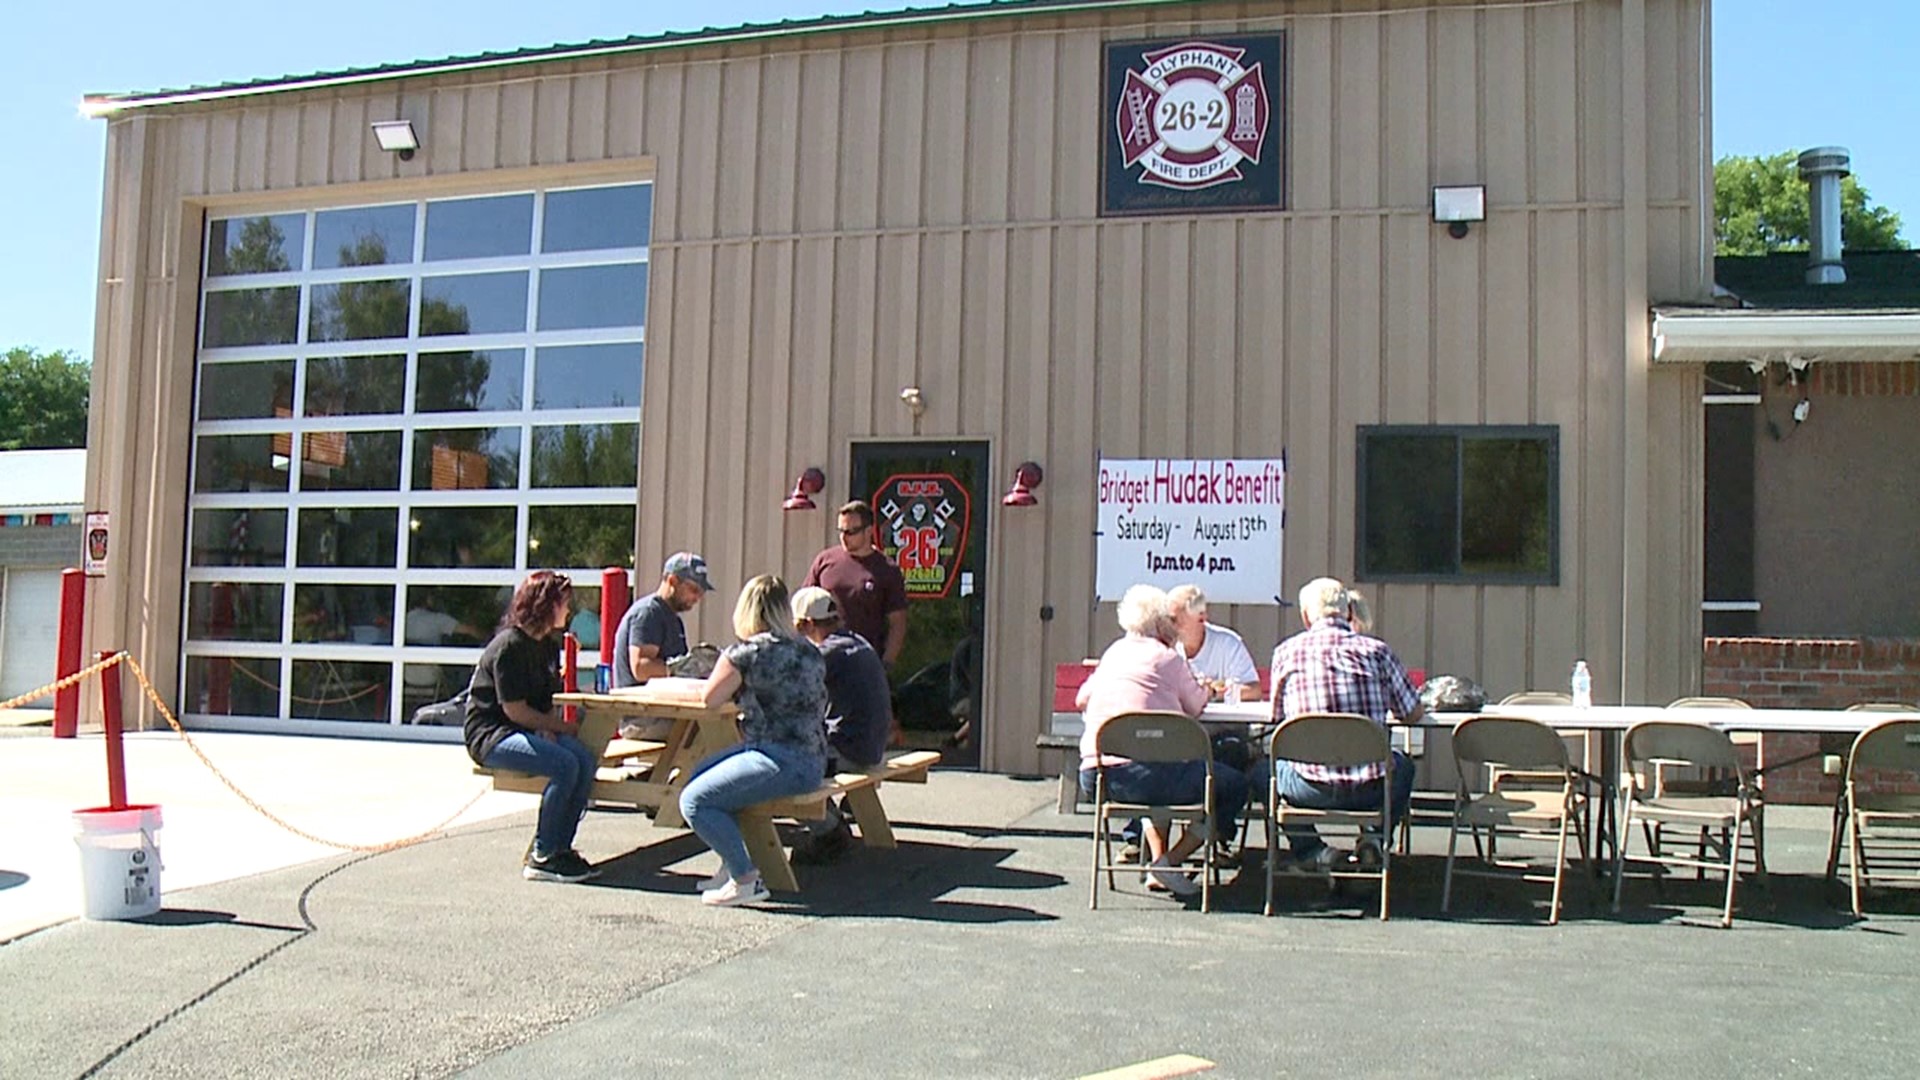 The benefit for Bridget Hudak was held at Olyphant Hose Co. #2 Saturday afternoon.